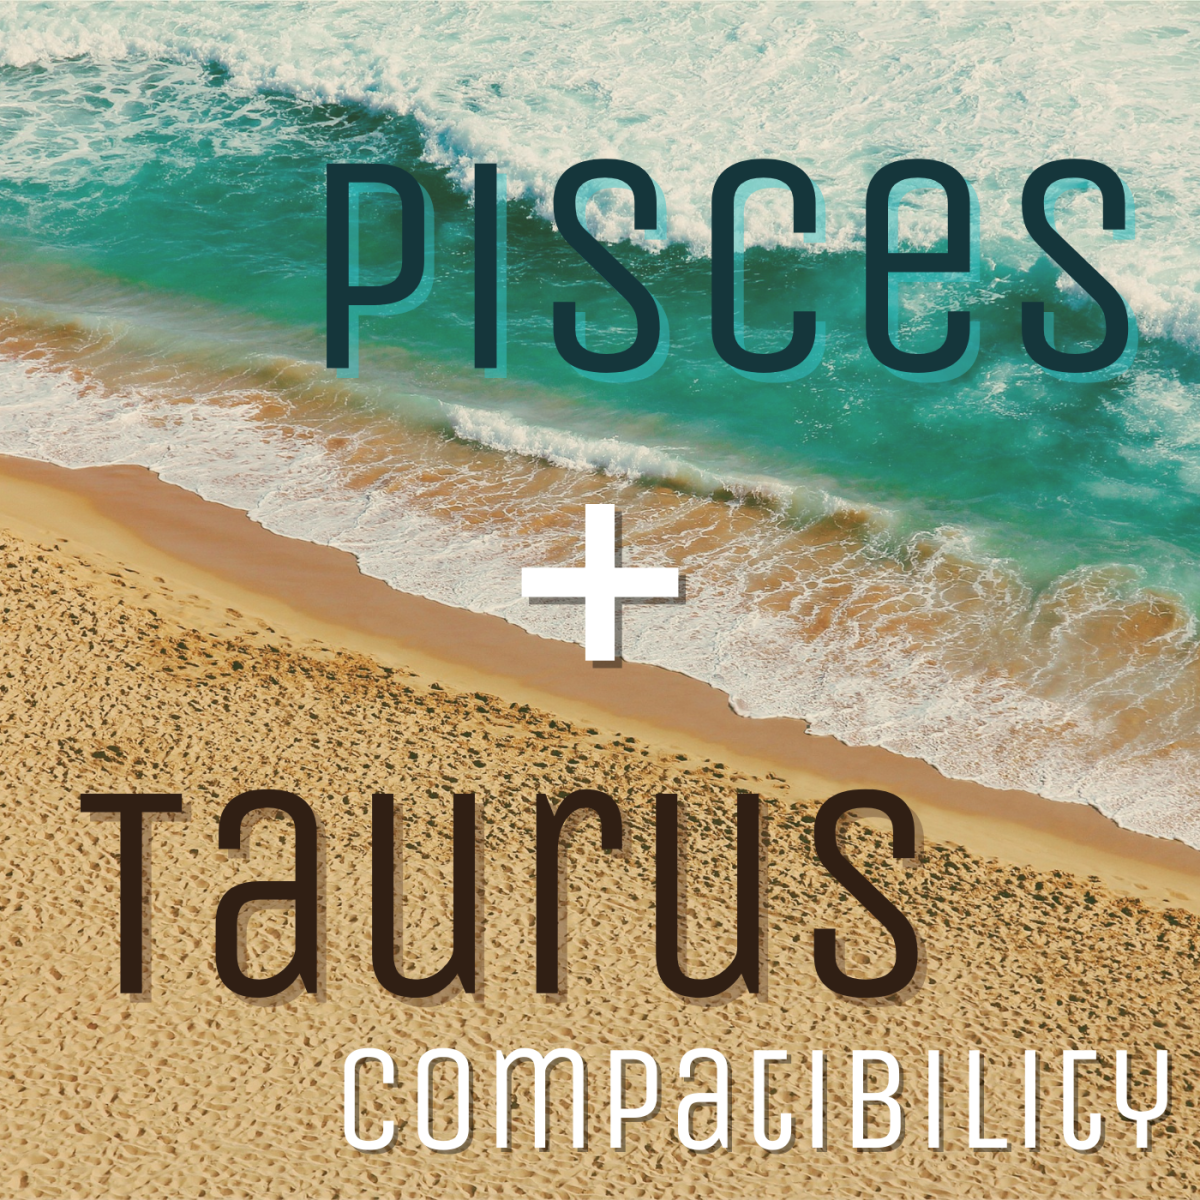 Taurus and Pisces Compatibility: Do They Argue or Get Along?